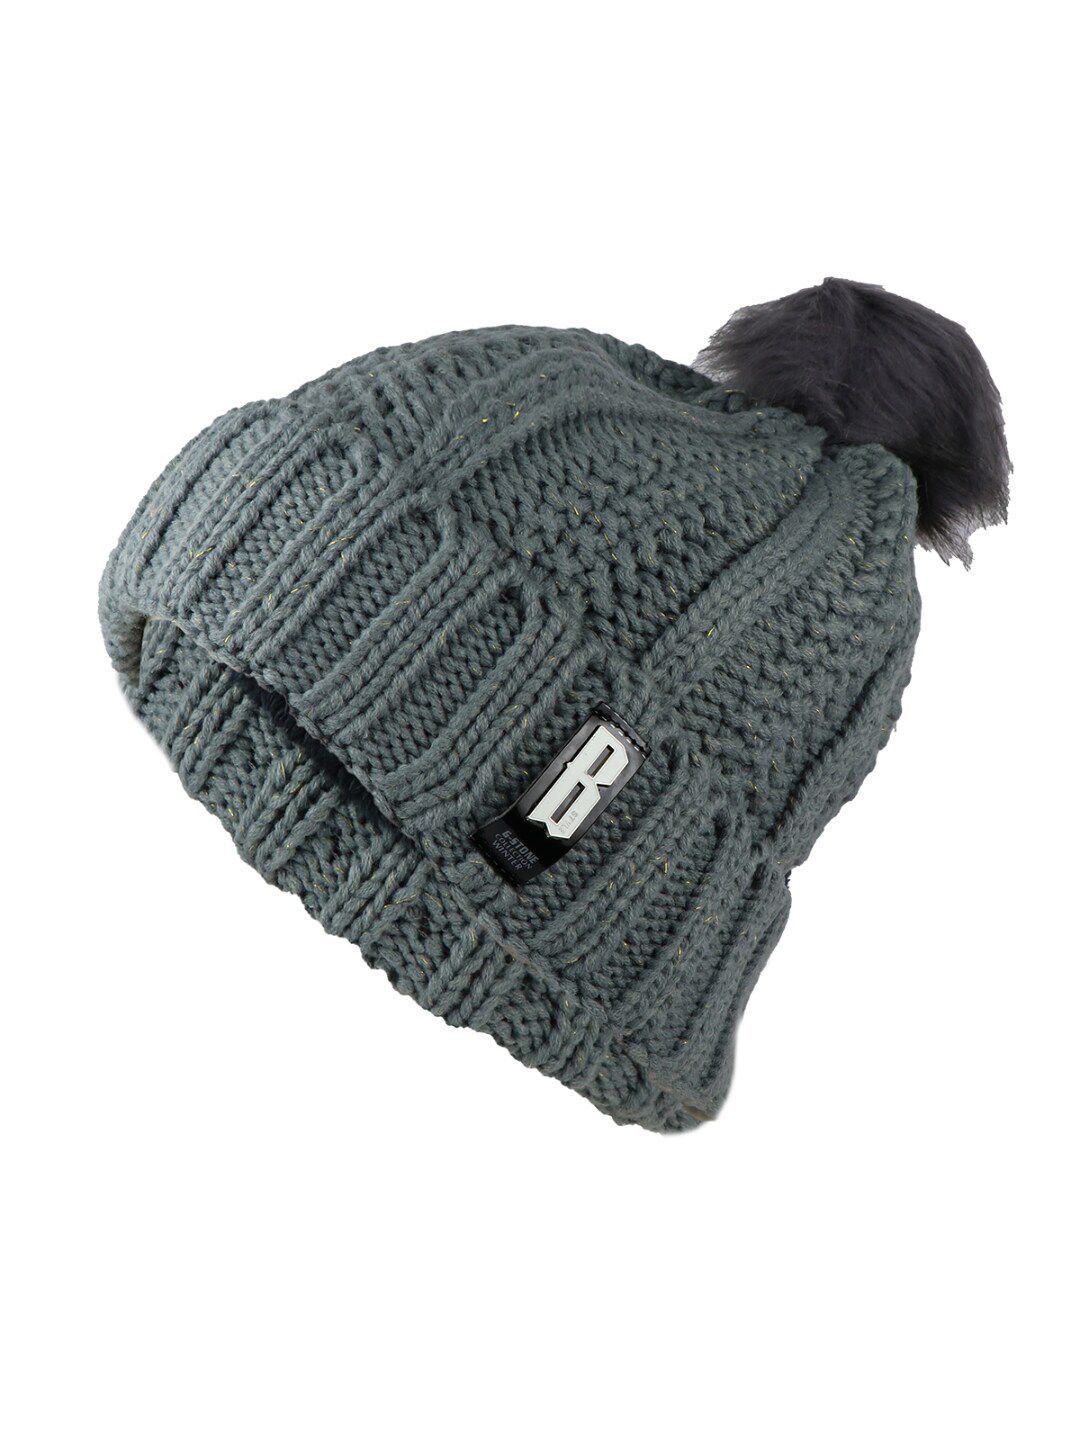 iSWEVEN Unisex Grey Beanie Price in India